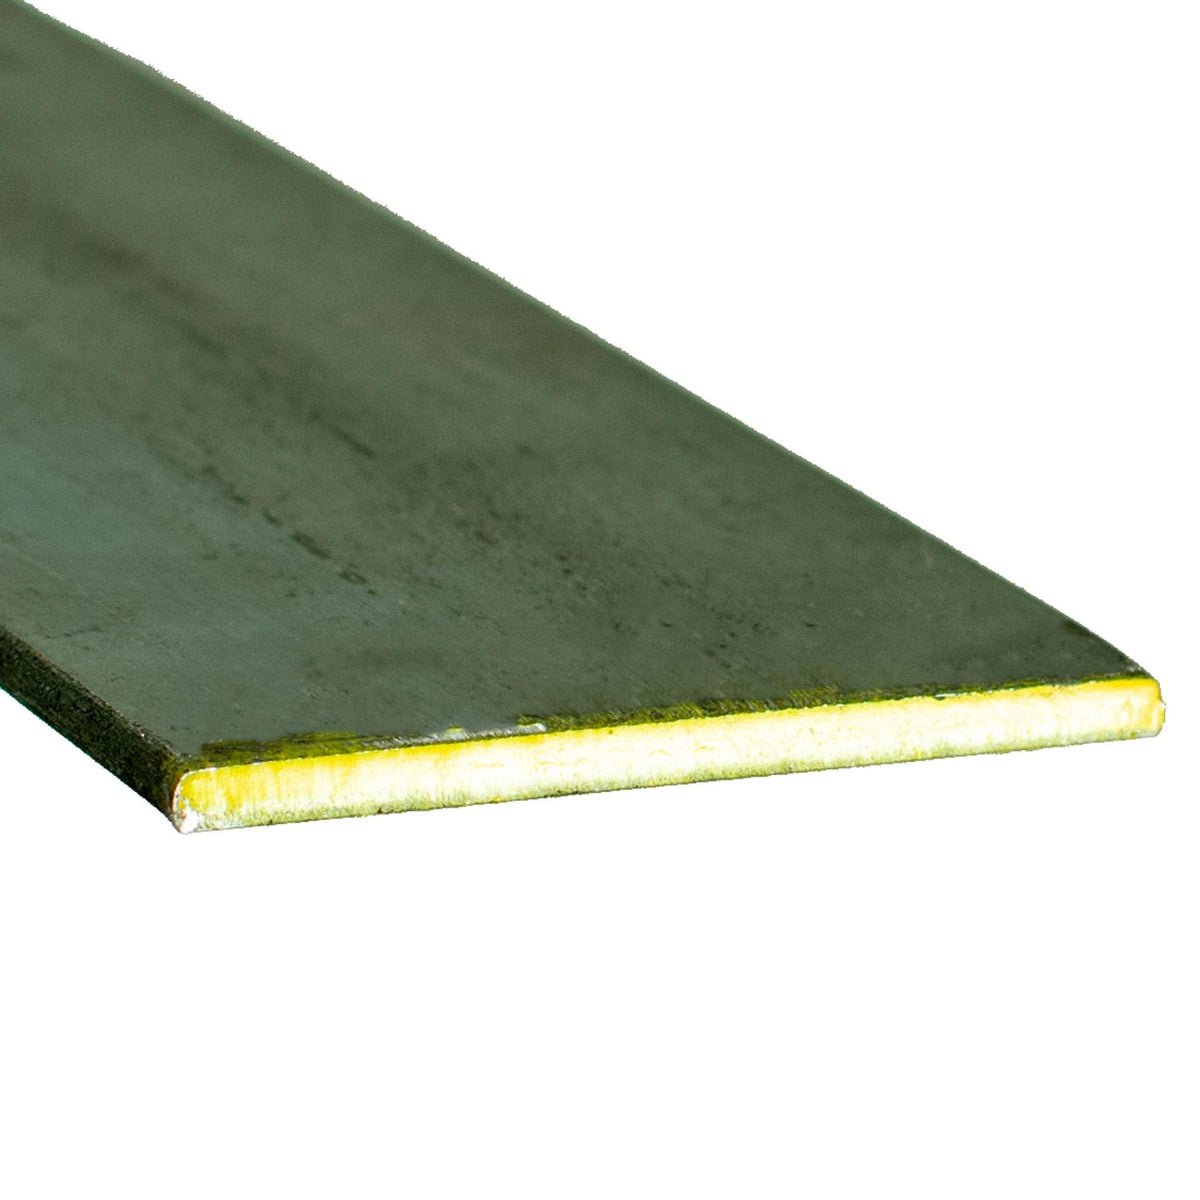 Hot Rolled Flat Bar Steel Raw Materials Sold at Lee Display - 2in X 3FT